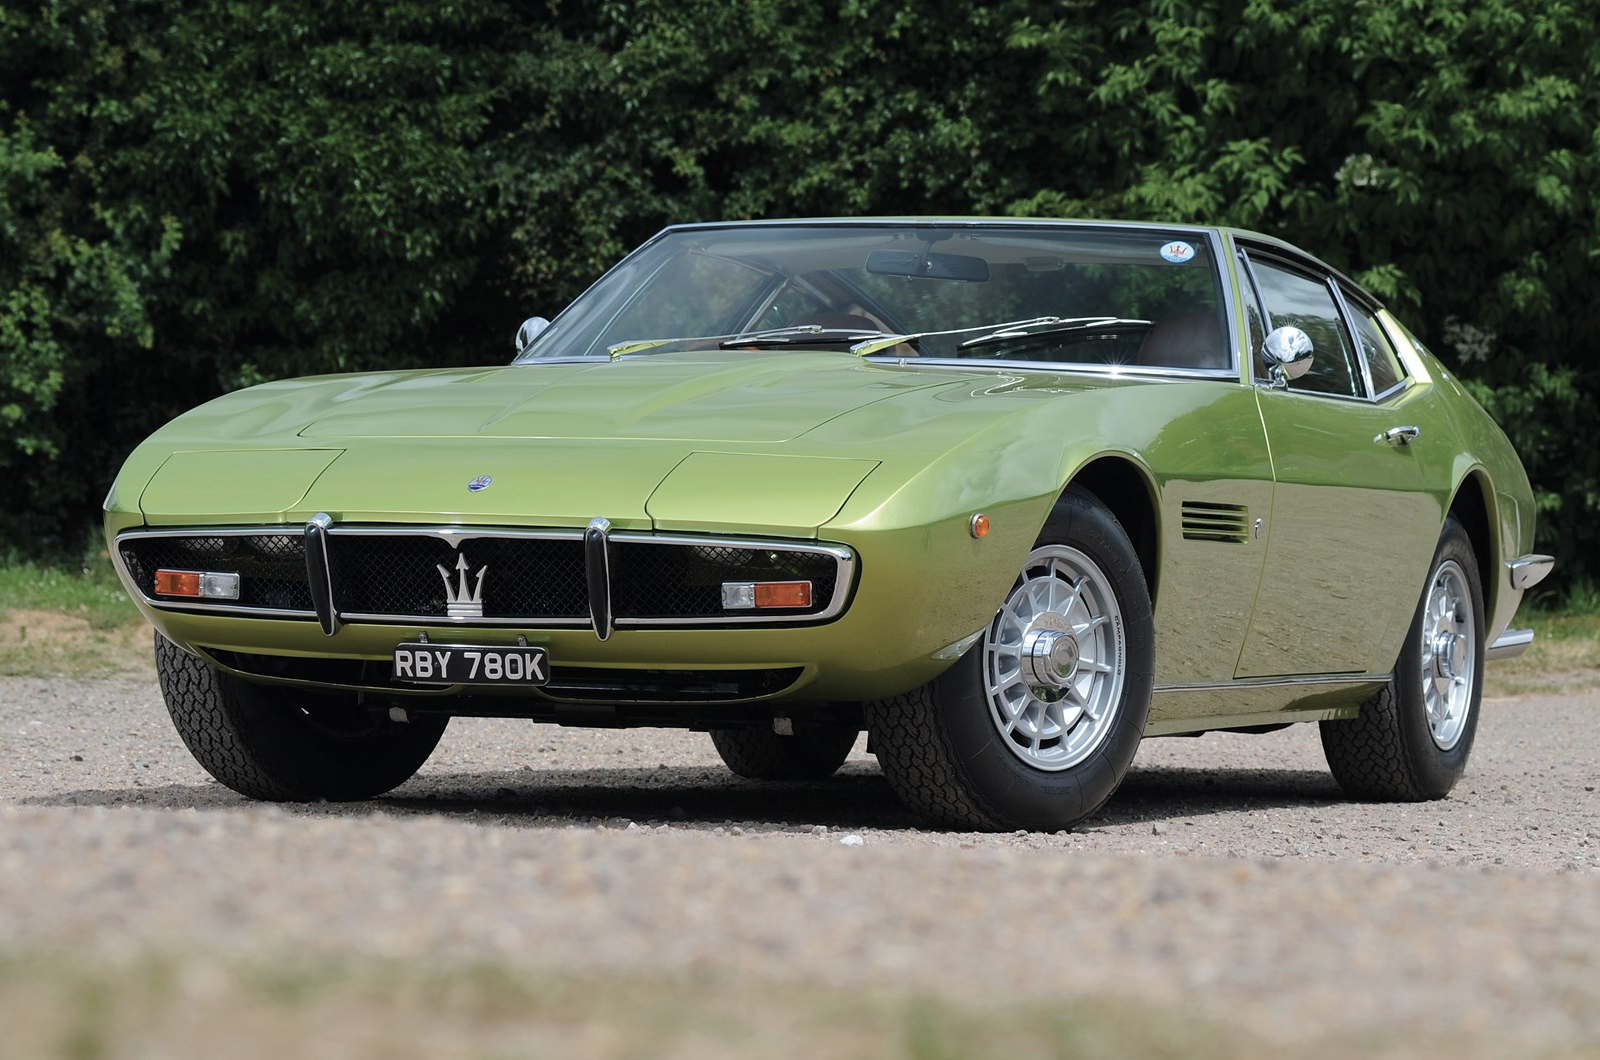 Meet the £3m Maserati collection for sale next month at RM Sotheby's London auction 